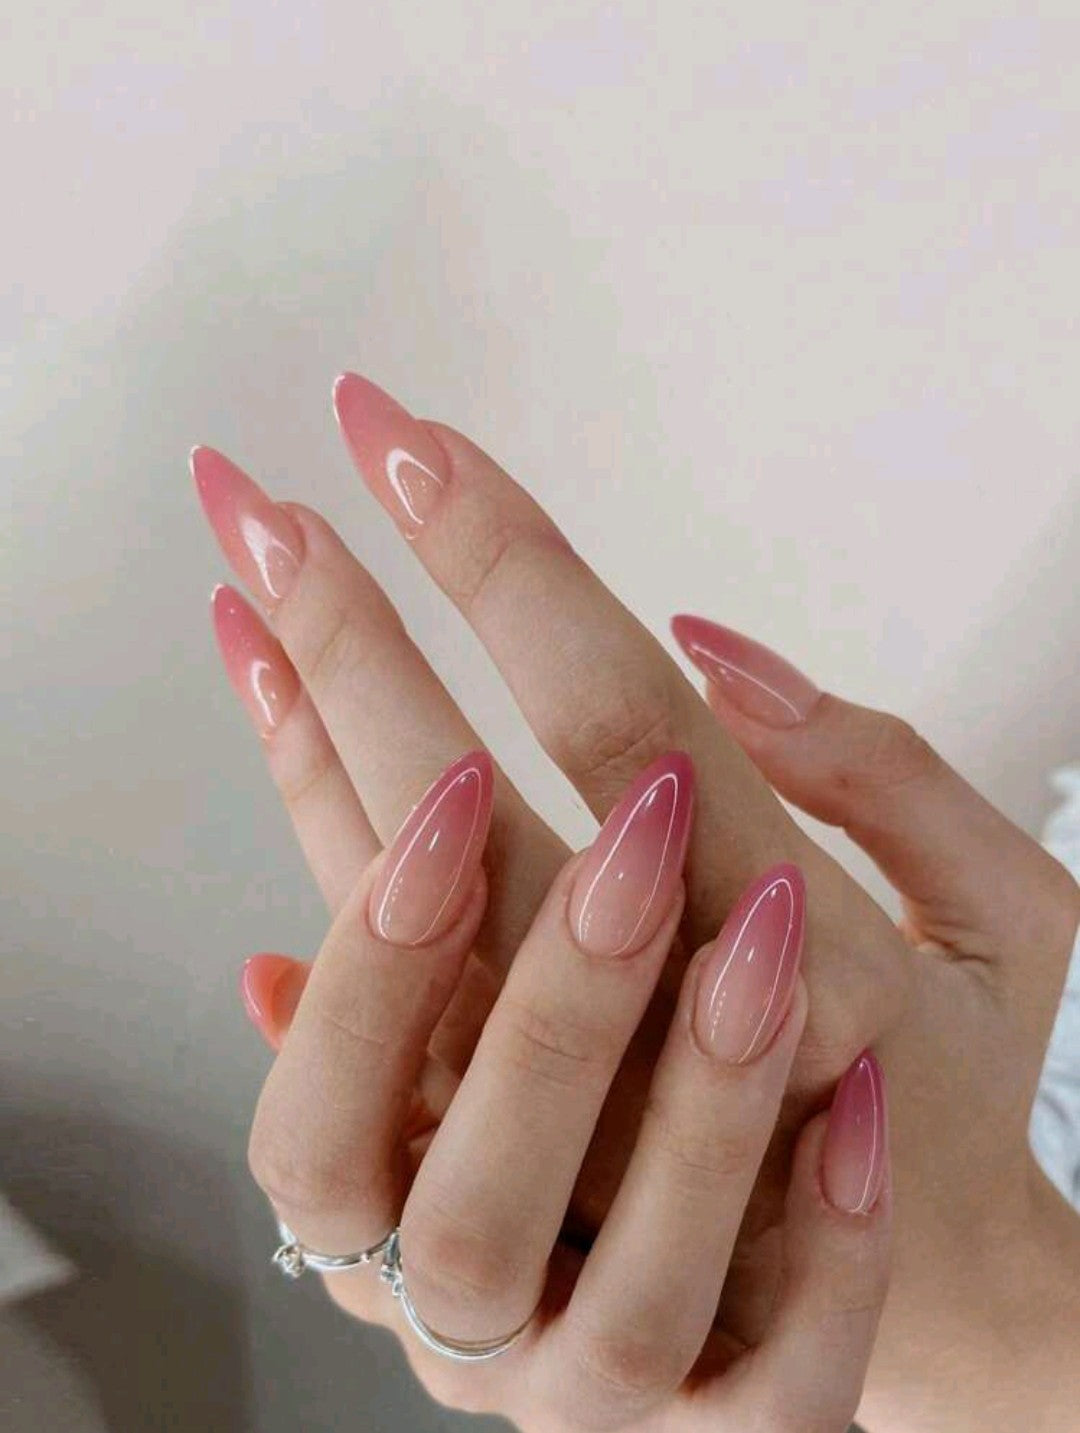 Fake nails Get Glamorous With 24pcs Medium Almond Ombre